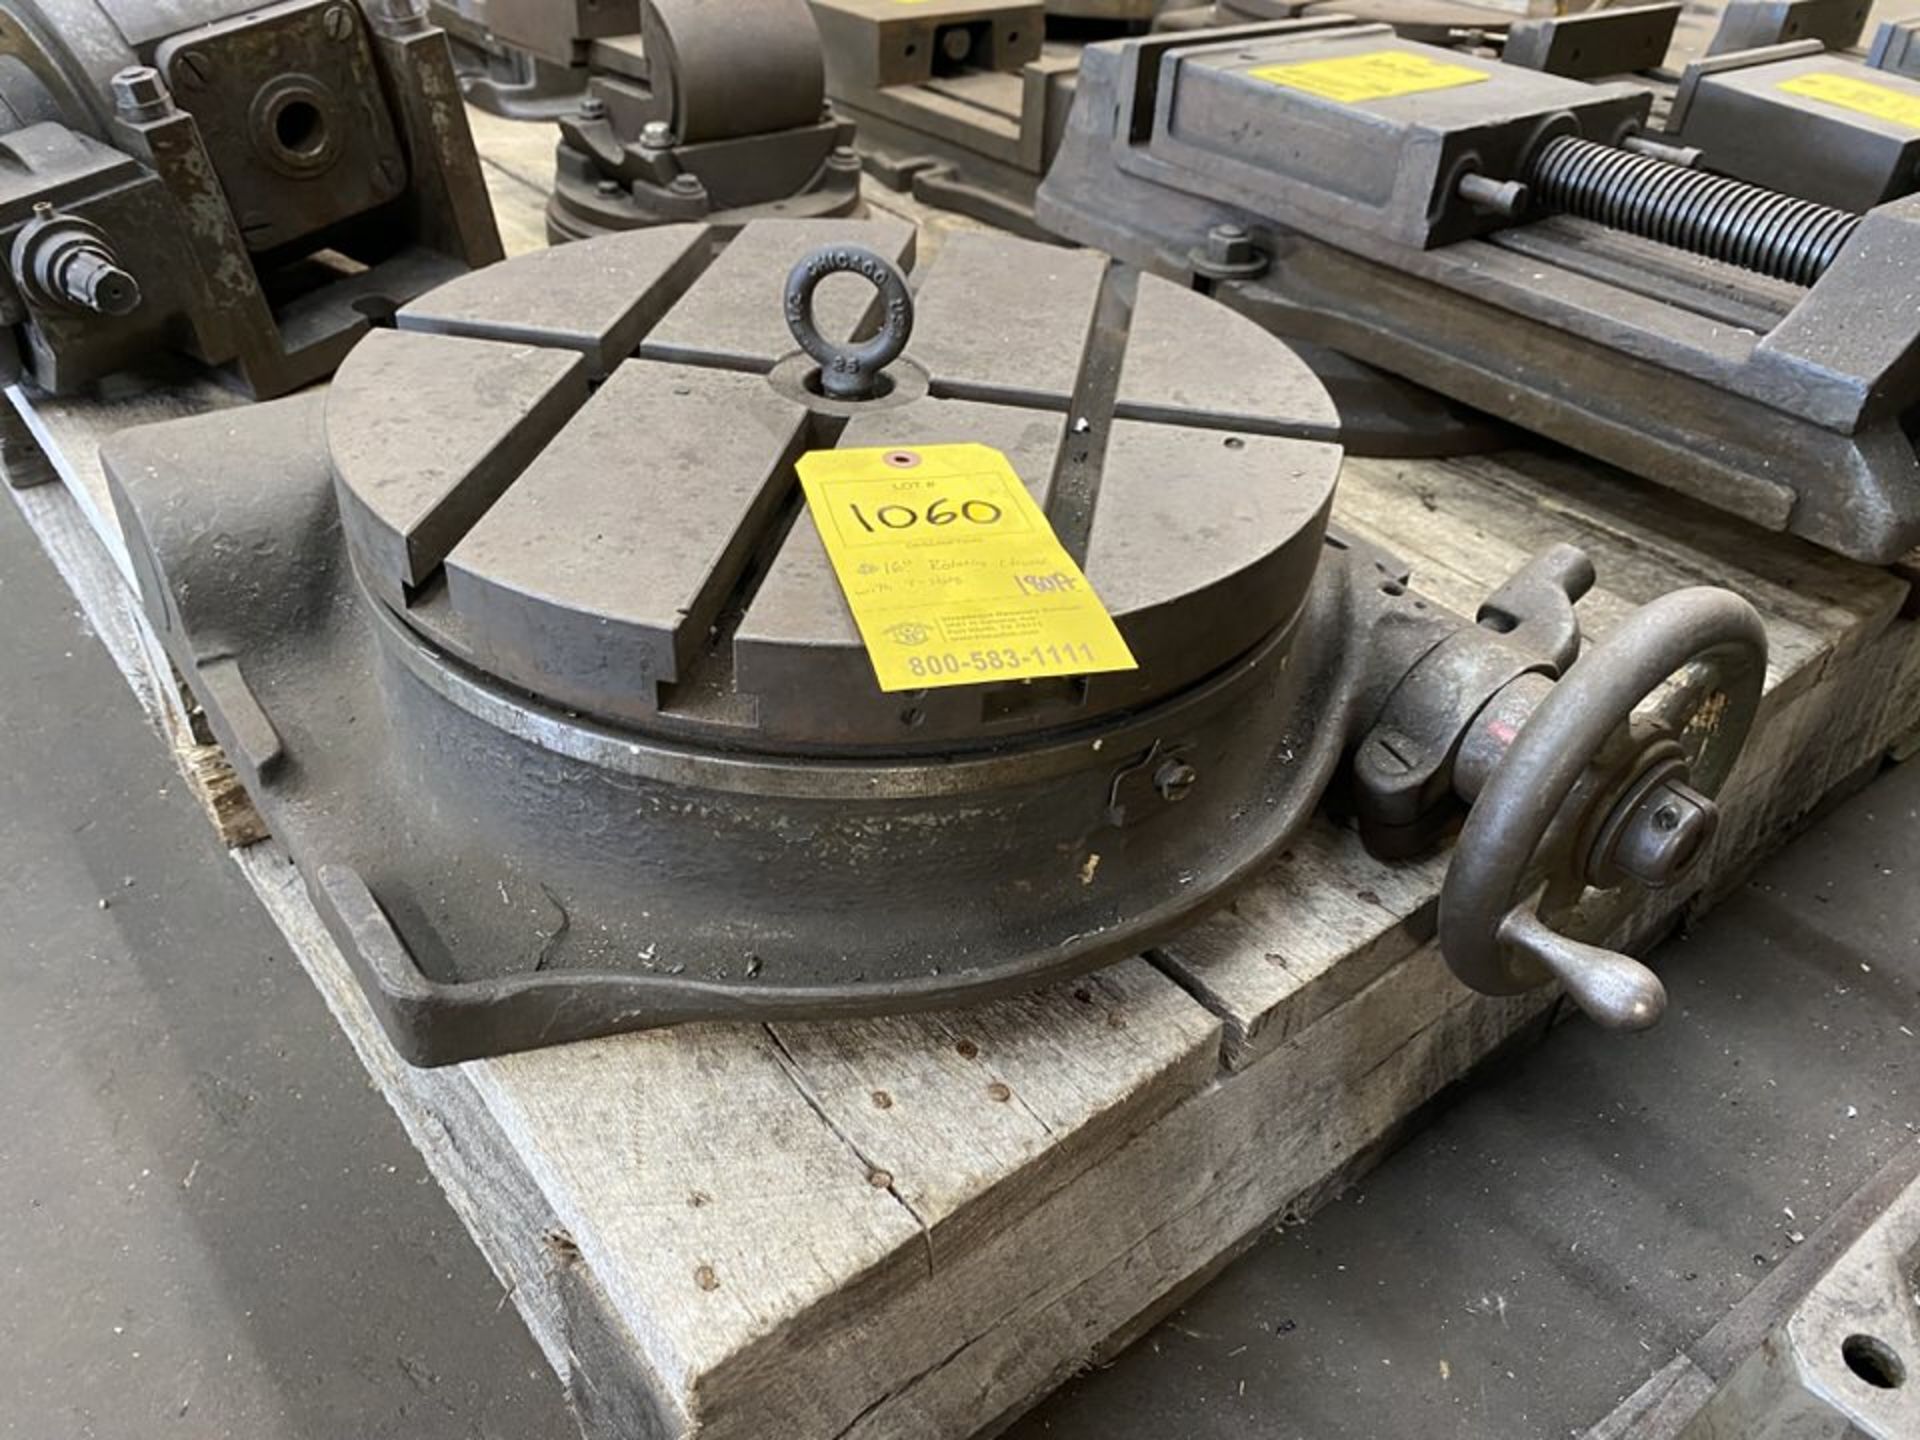 16" Rotary Table Chuck with 3 T-slots